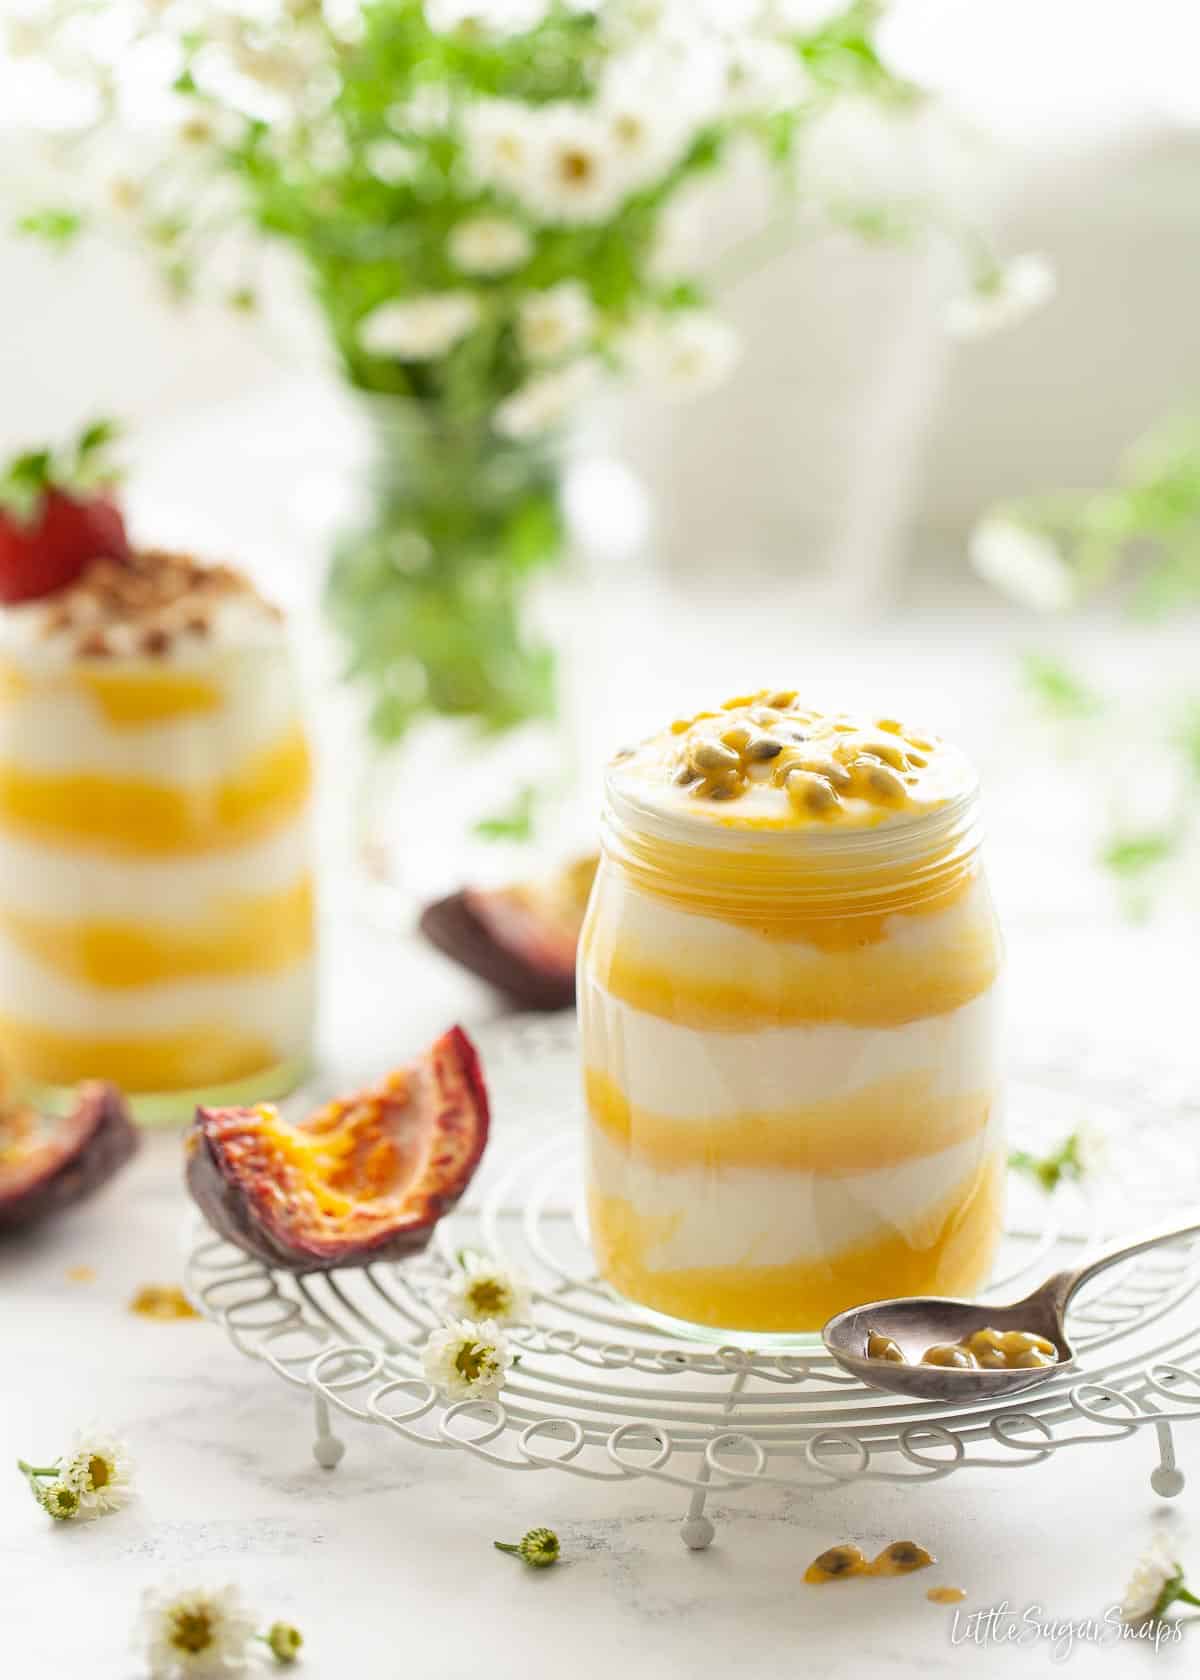 Jars filled with layers of yoghurt and passion fruit curd and topped with seeds.